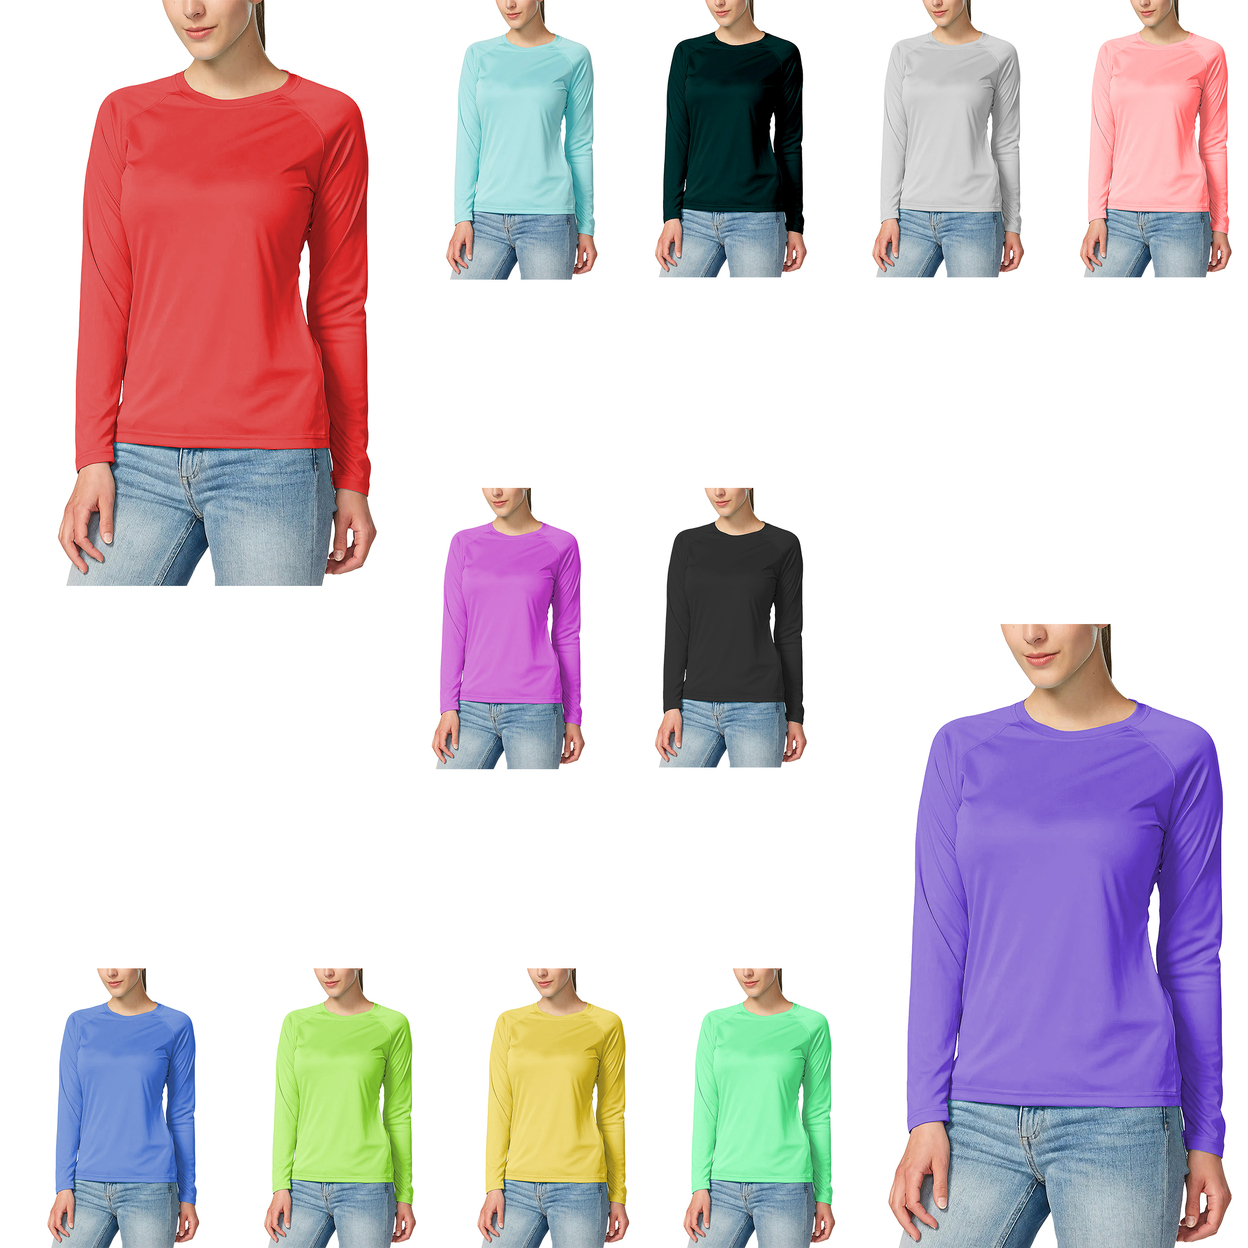 6-Pack: Women's Dri-Fit Moisture-Wicking Breathable Long Sleeve T-Shirt - Large